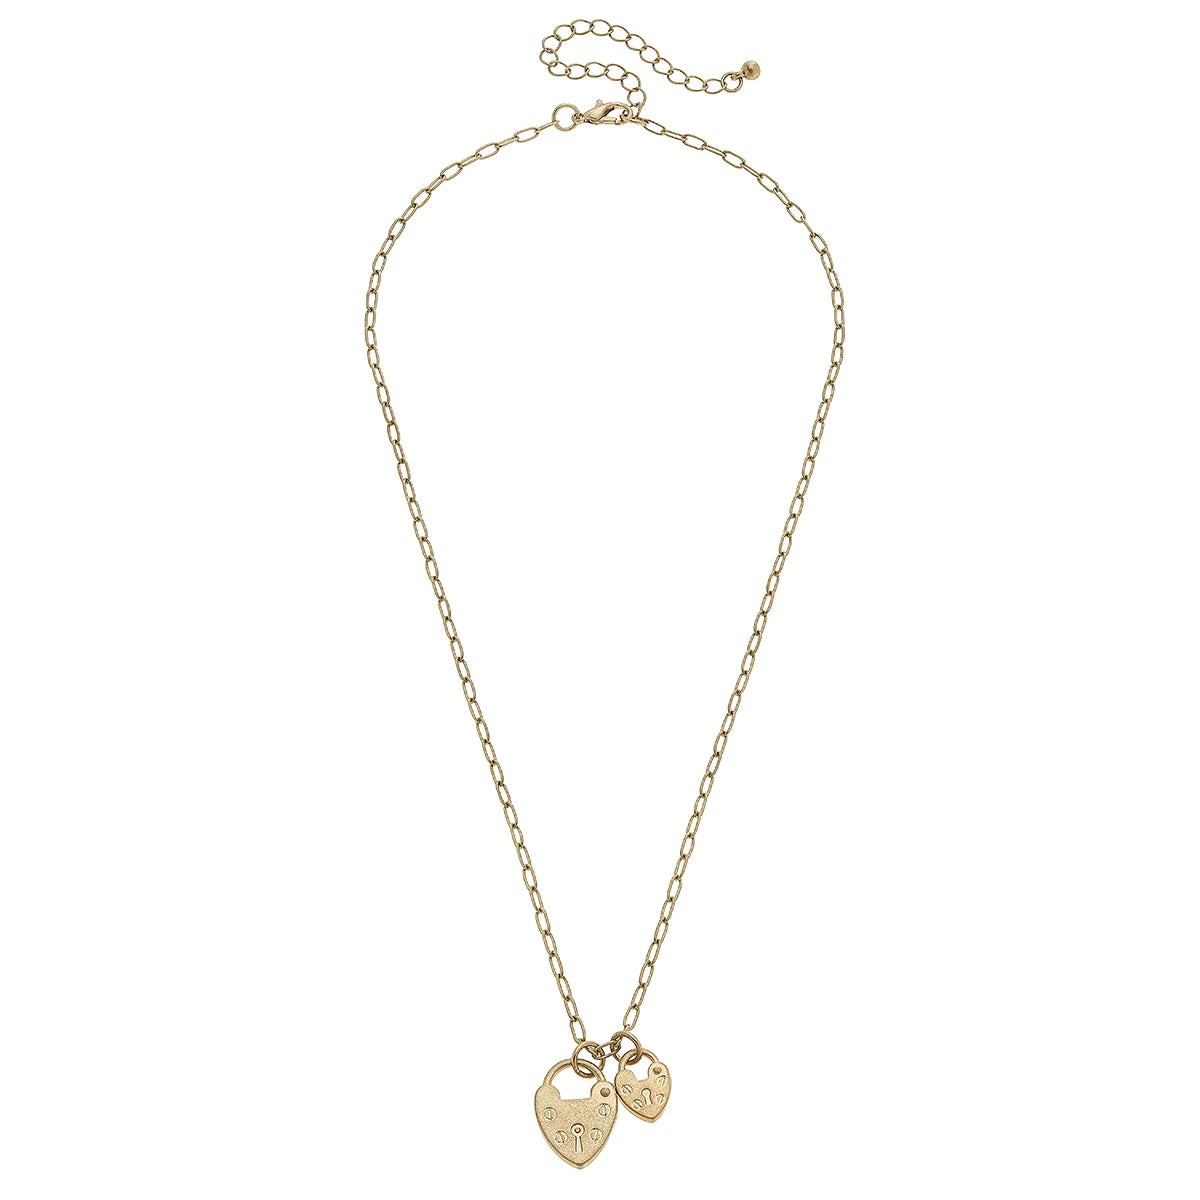 Necklaces- Canvas Mia Heart Padlock Charms Necklace in Worn Gold